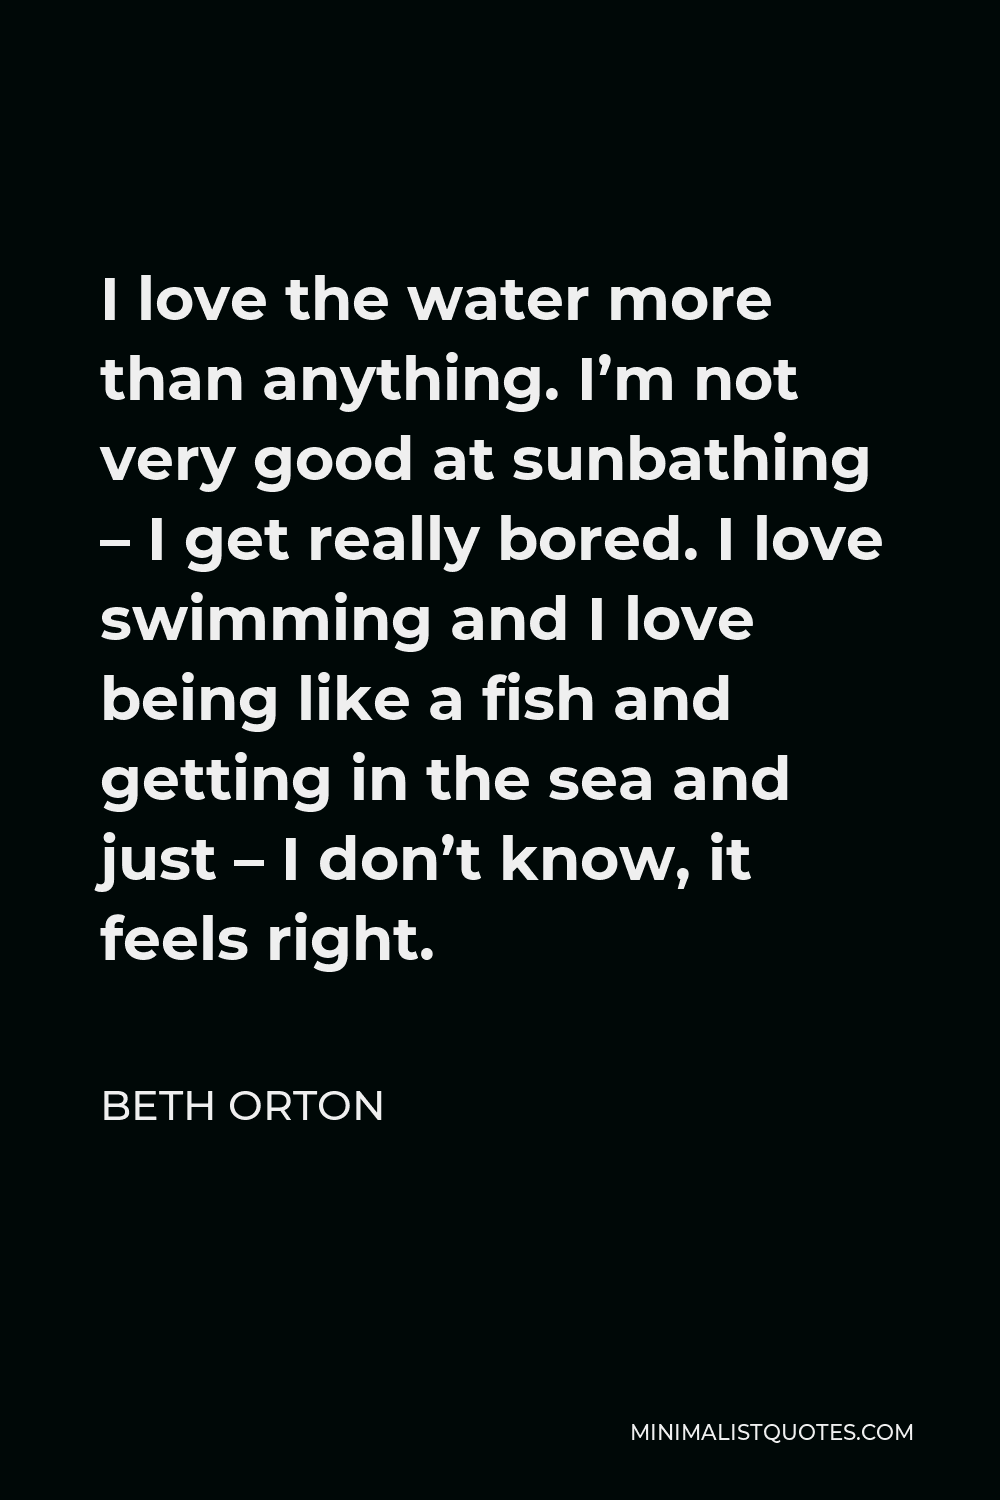 Beth Orton Quote - I love the water more than anything. I’m not very good at sunbathing – I get really bored. I love swimming and I love being like a fish and getting in the sea and just – I don’t know, it feels right.